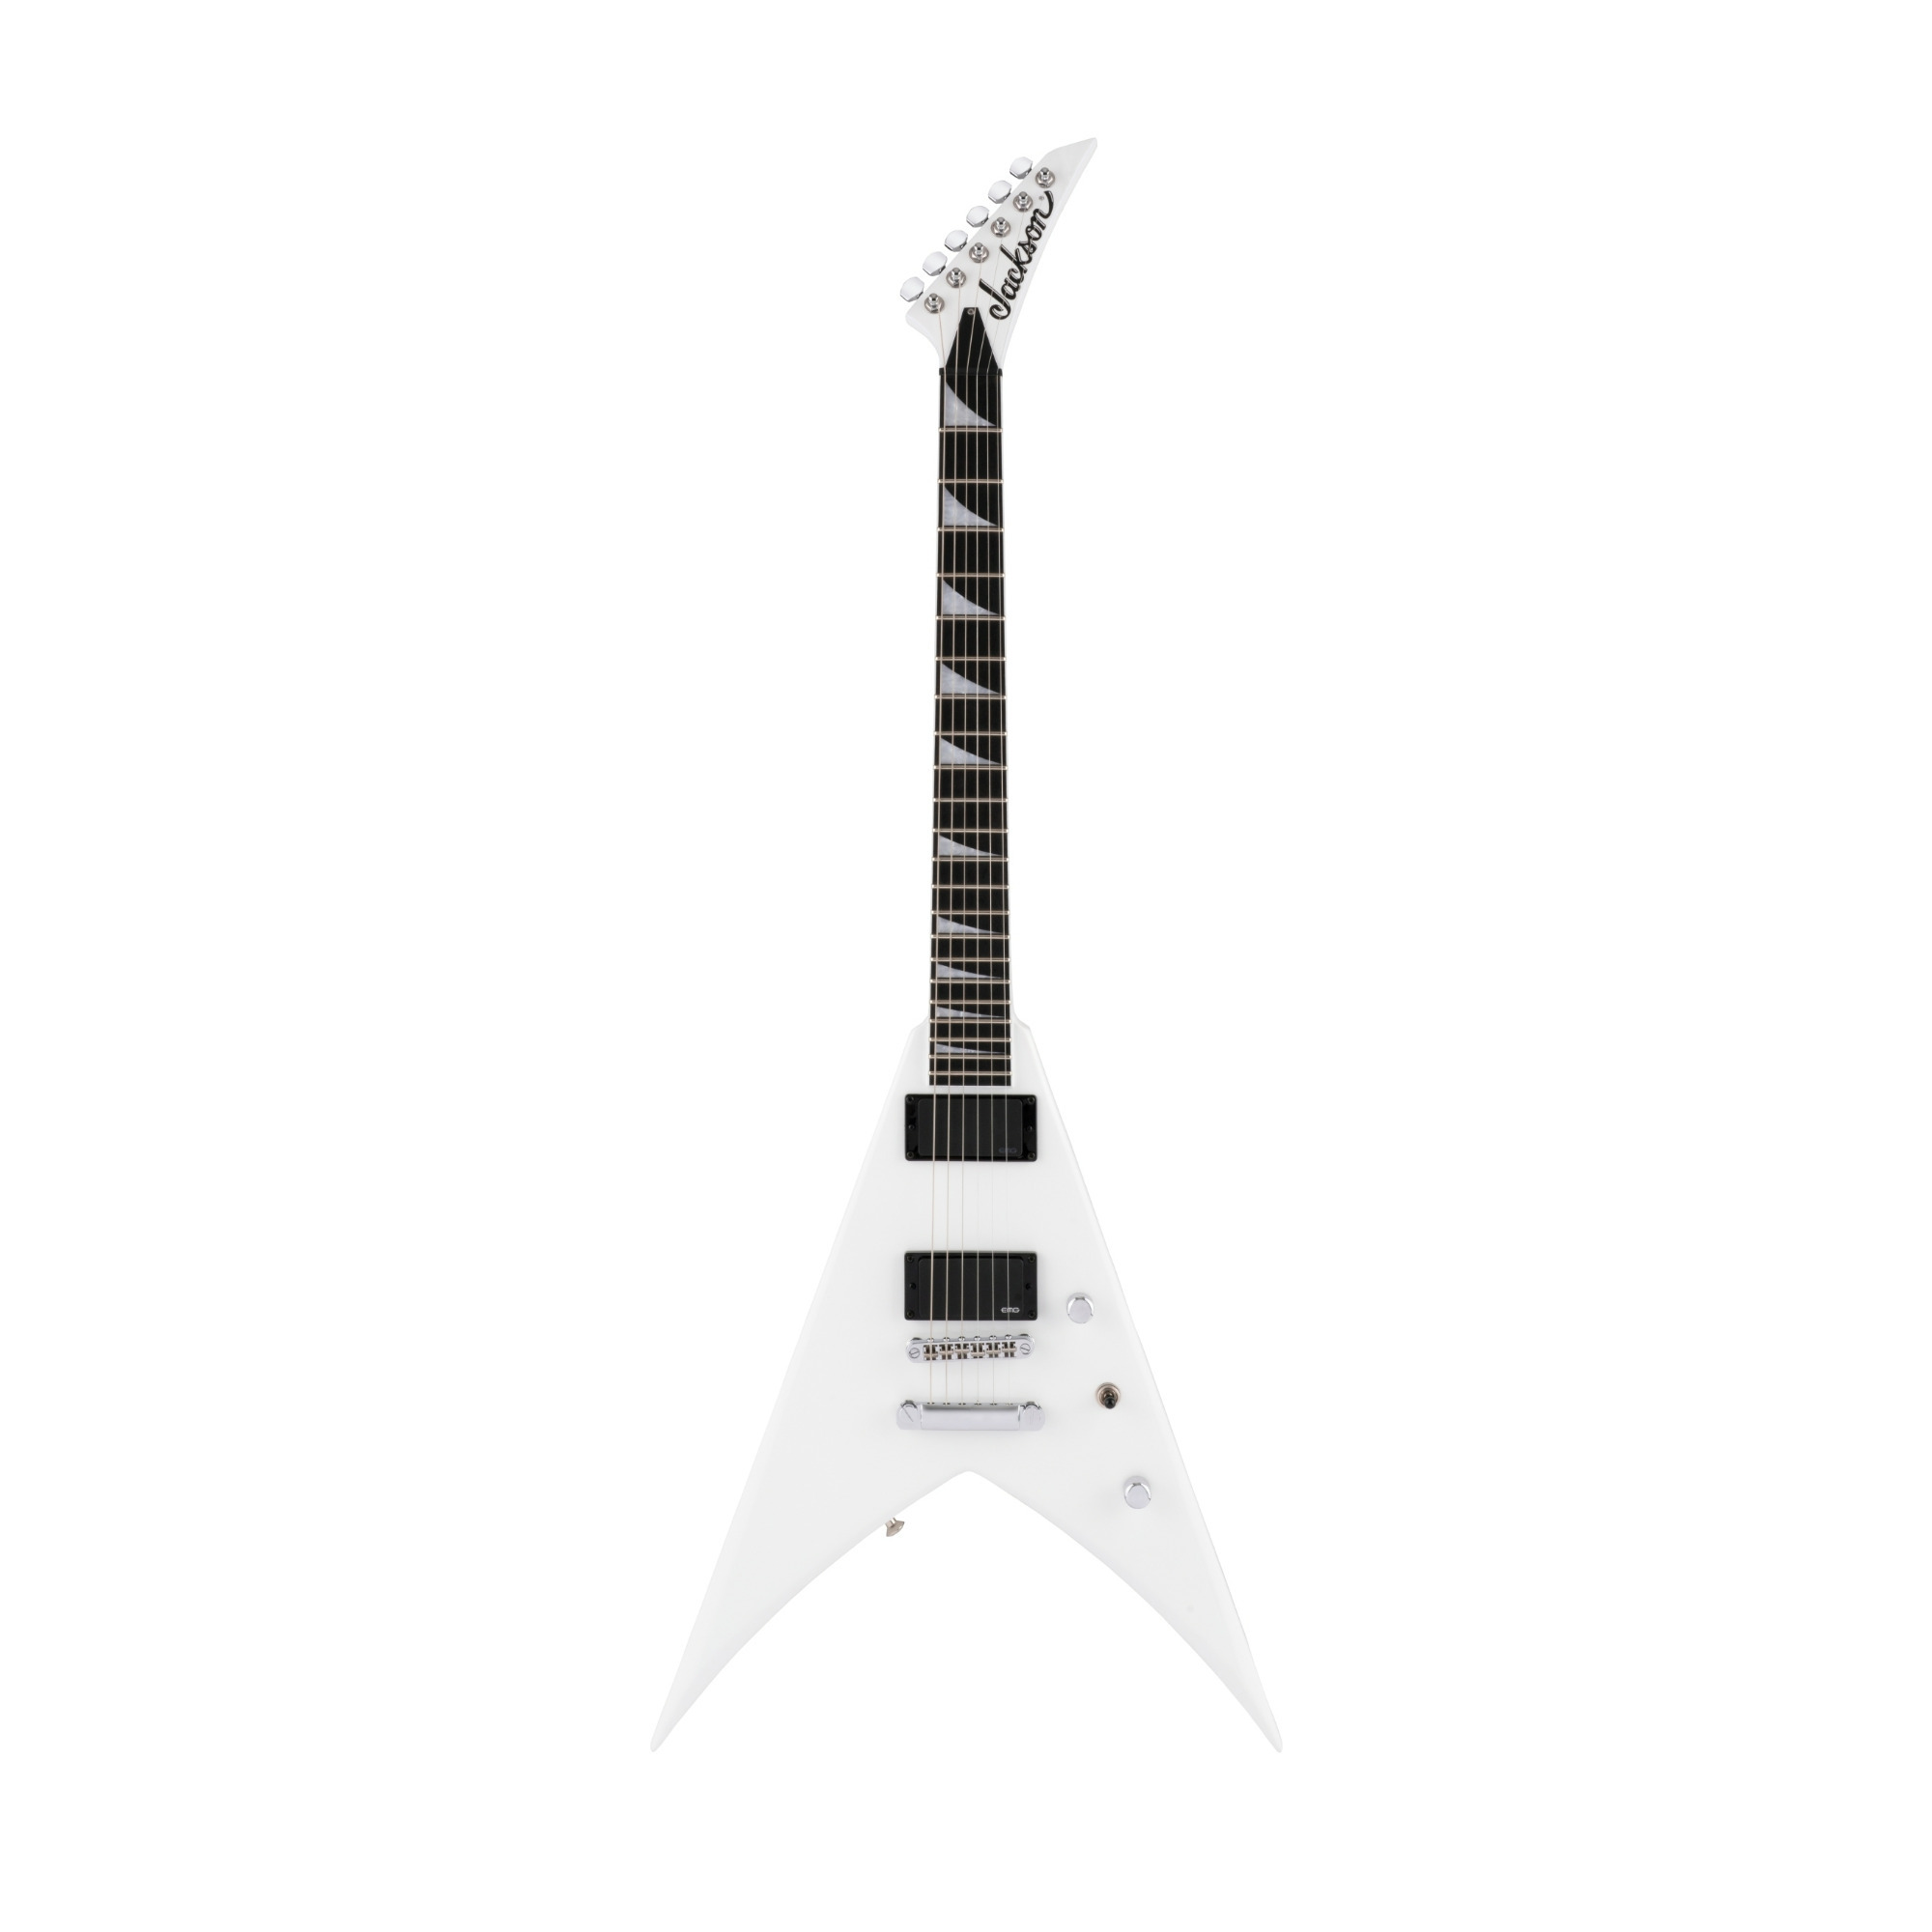 Jackson Pro Series King V 6-String Electric Guitar with Ebony Fingerboard (Right-Handed, White) -  2914413576